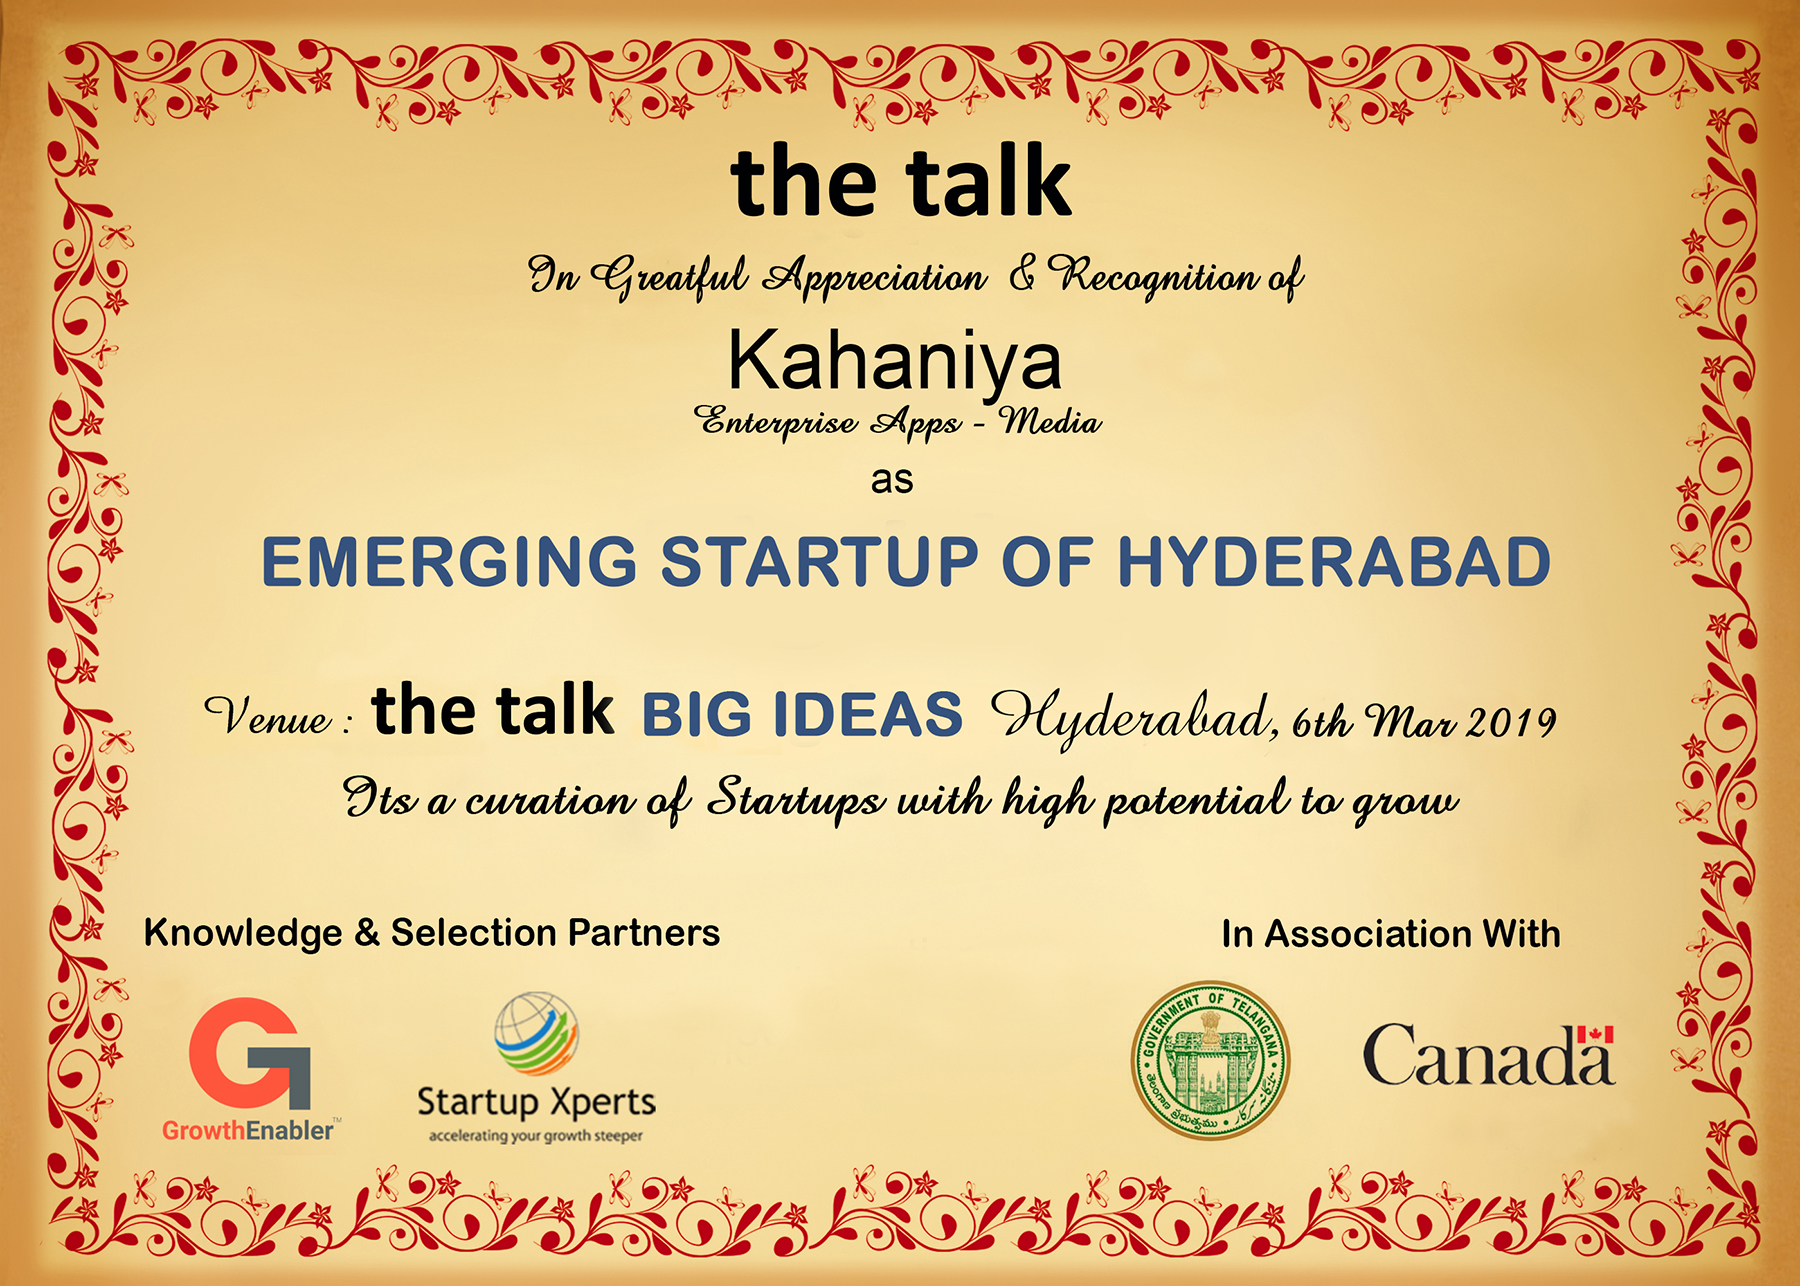 the talk - Big Ideas To Scale SME's And Startups The Westin, Hyderabad - 06th May 2019